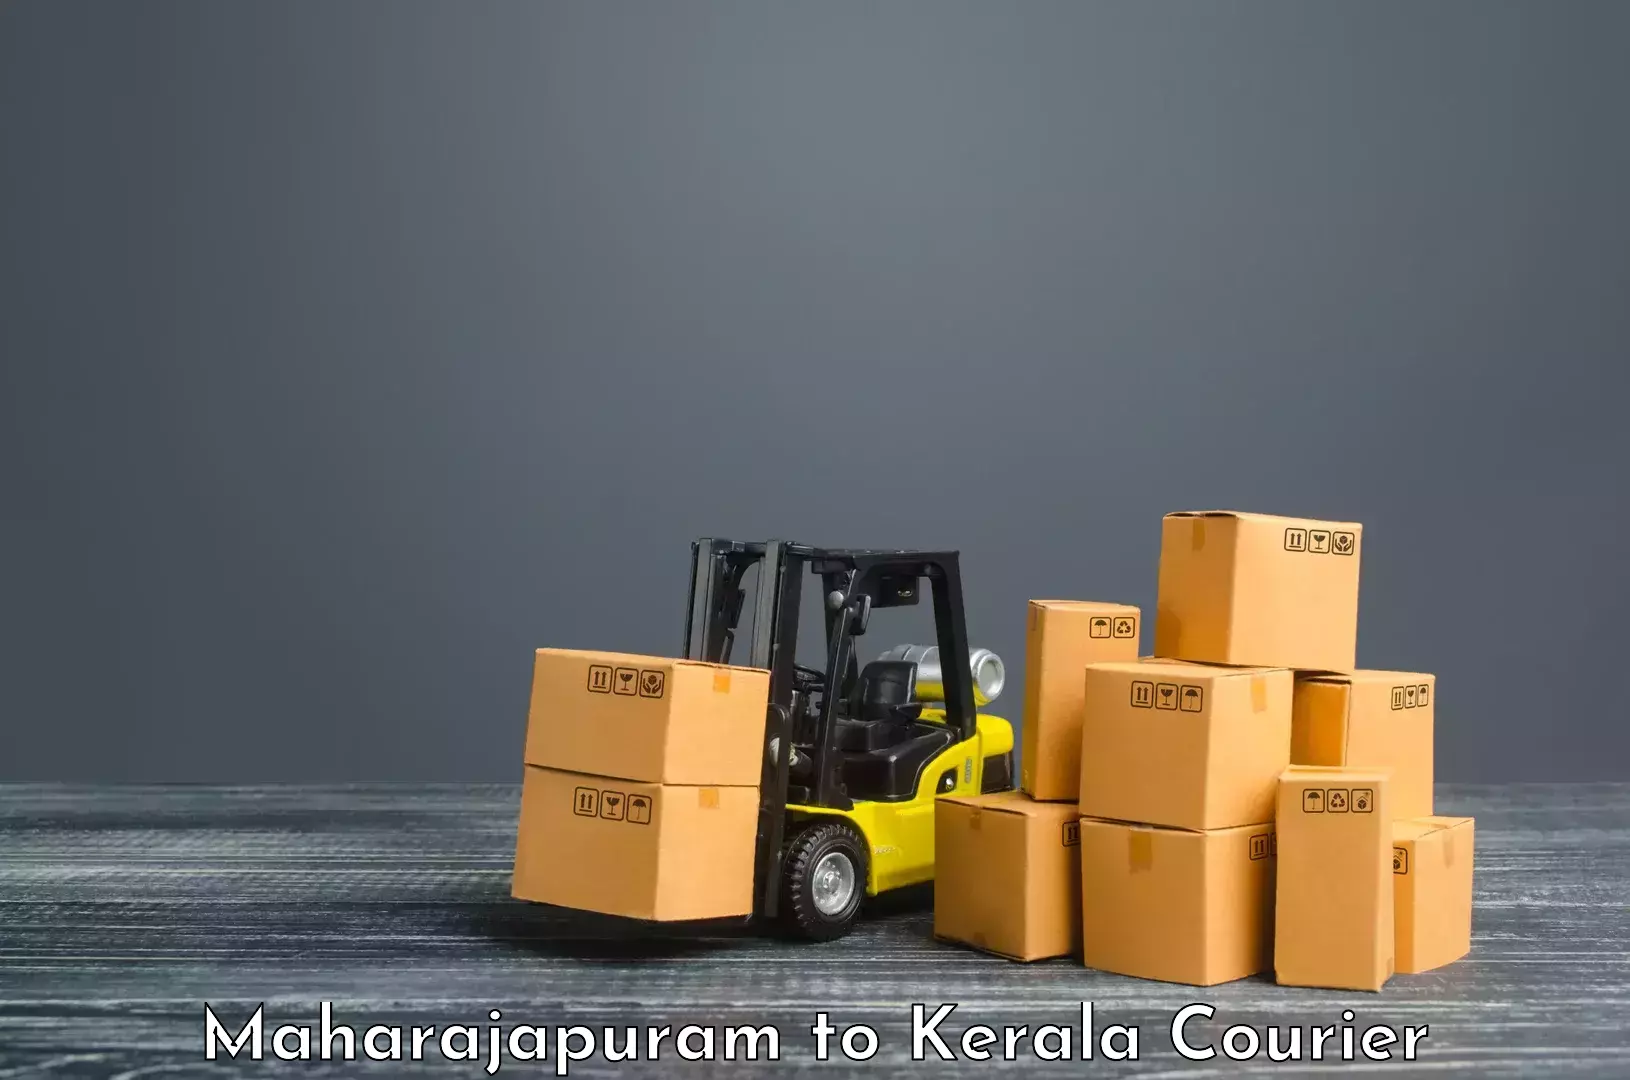 Innovative courier solutions Maharajapuram to Cochin University of Science and Technology